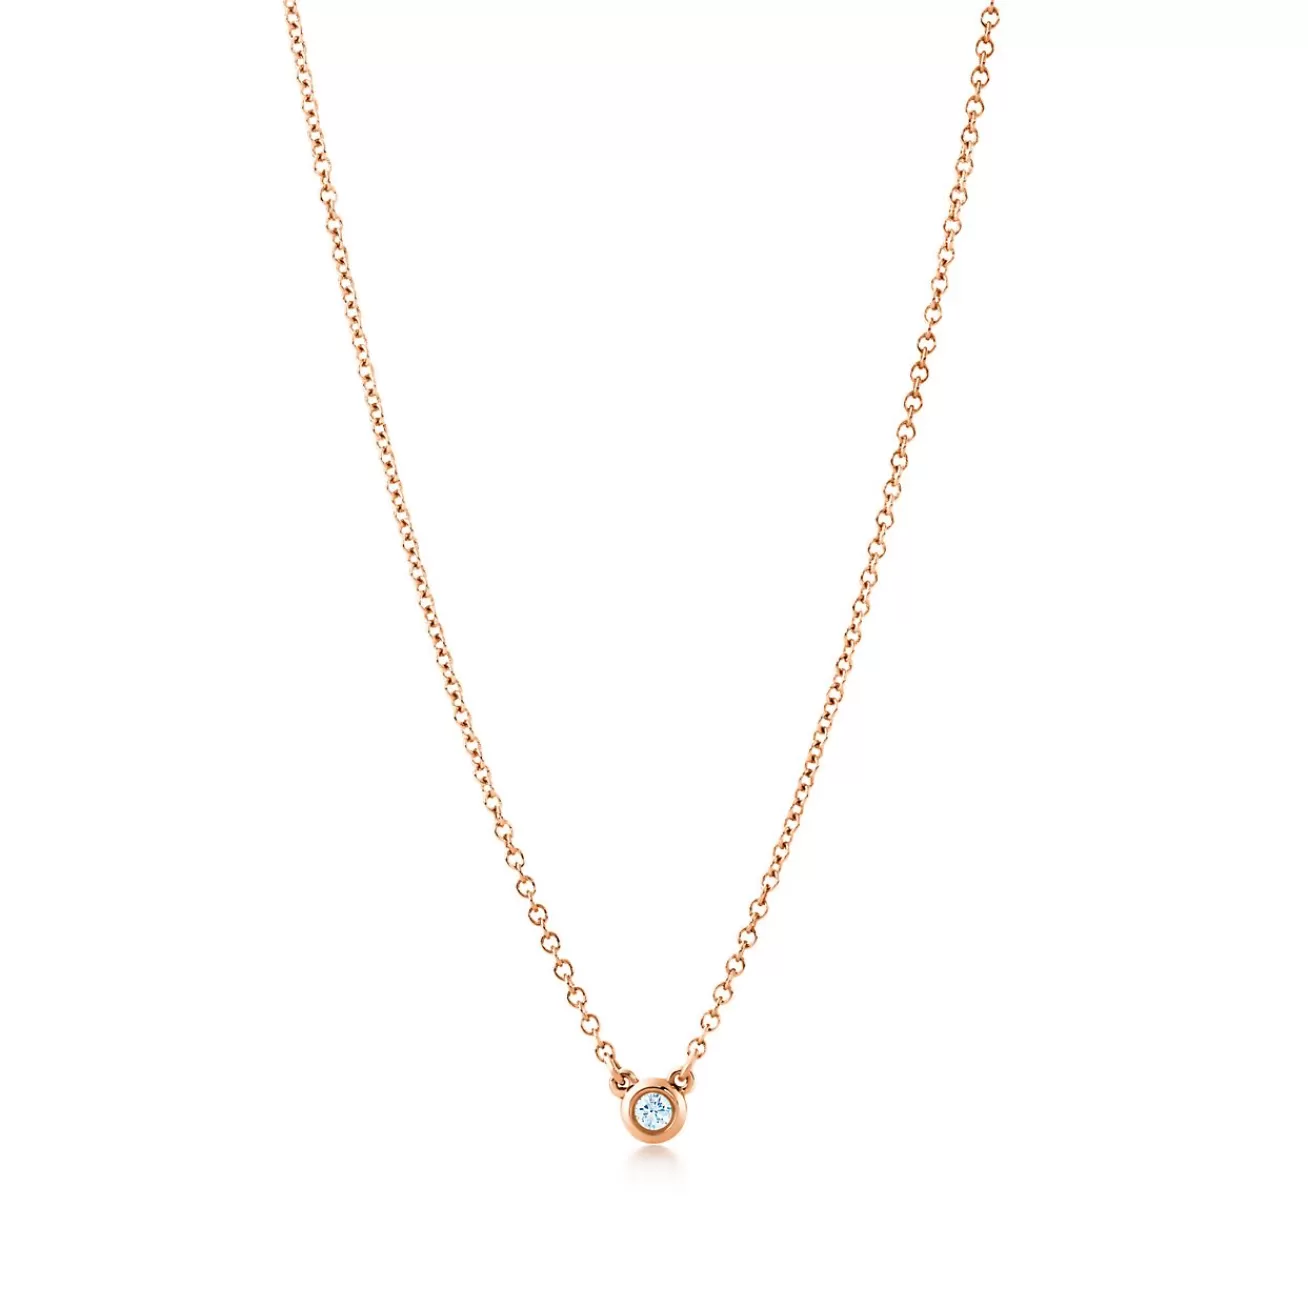 Tiffany & Co. Elsa Peretti® Diamonds by the Yard® pendant in 18k rose gold with a round brilliant diamond. | ^ Necklaces & Pendants | Gifts for Her